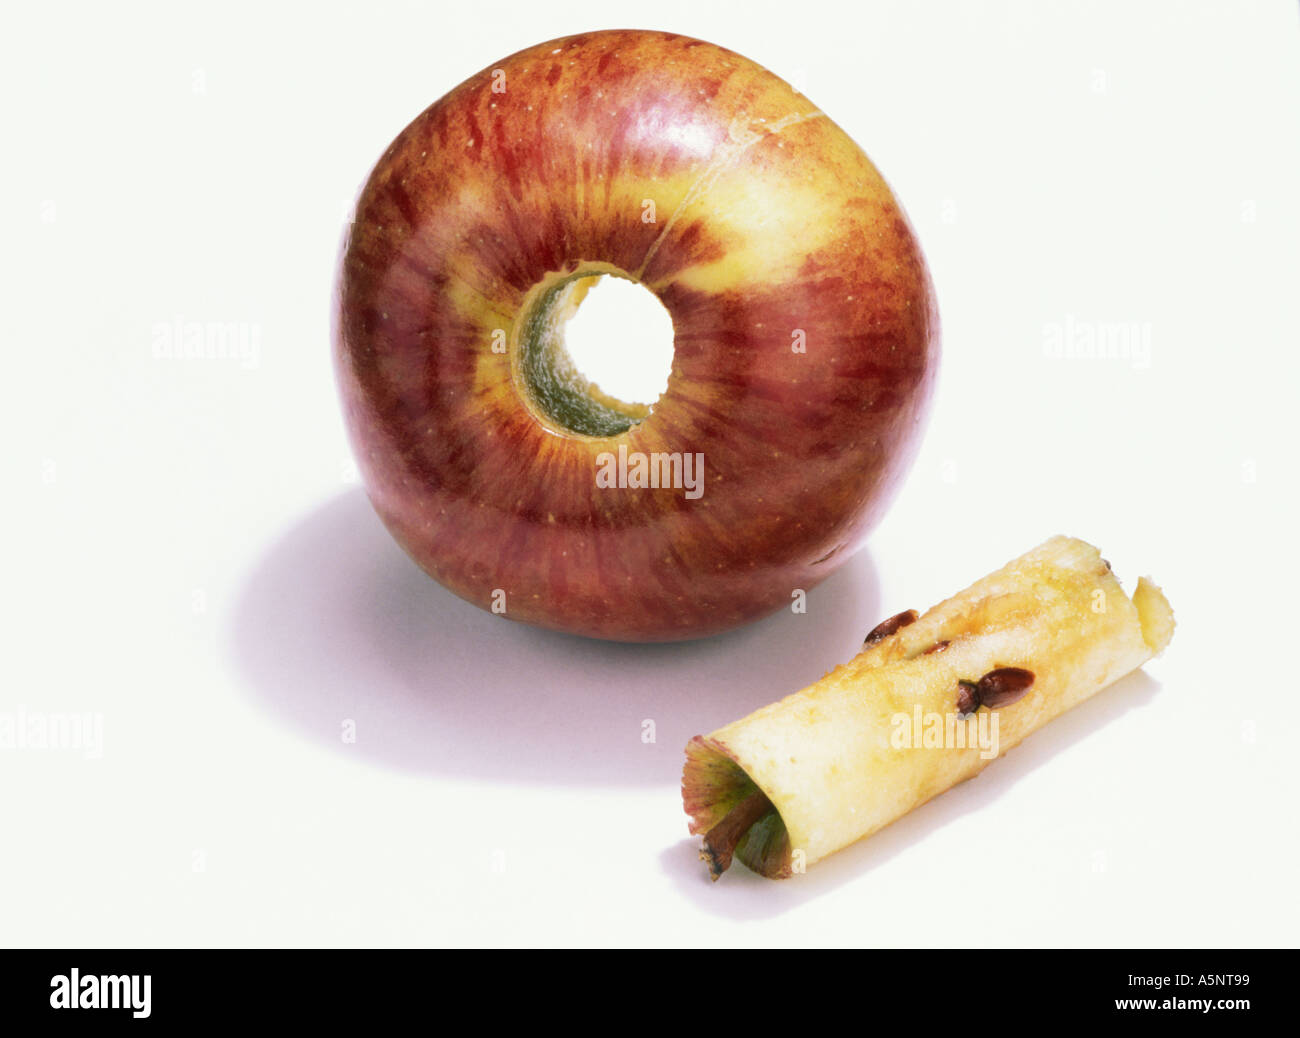 An apple and apple core Stock Photo